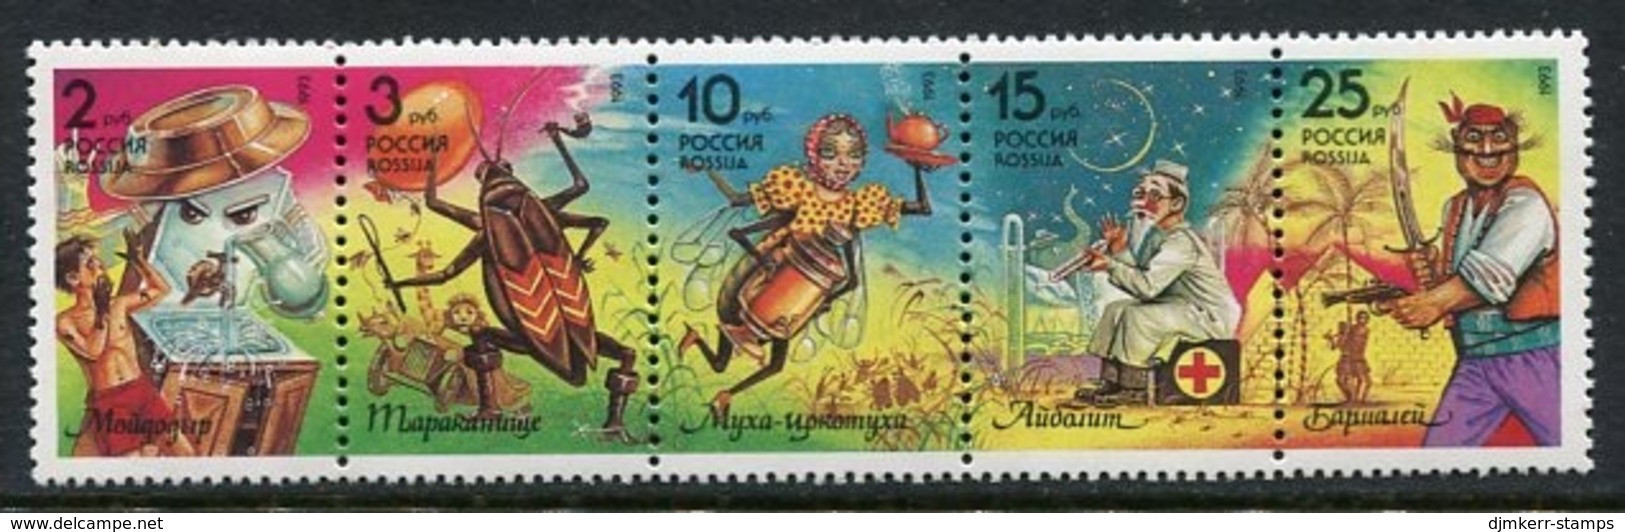 RUSSIA 1993 Children's Book Characters MNH / ** .  Michel 289-93 - Unused Stamps